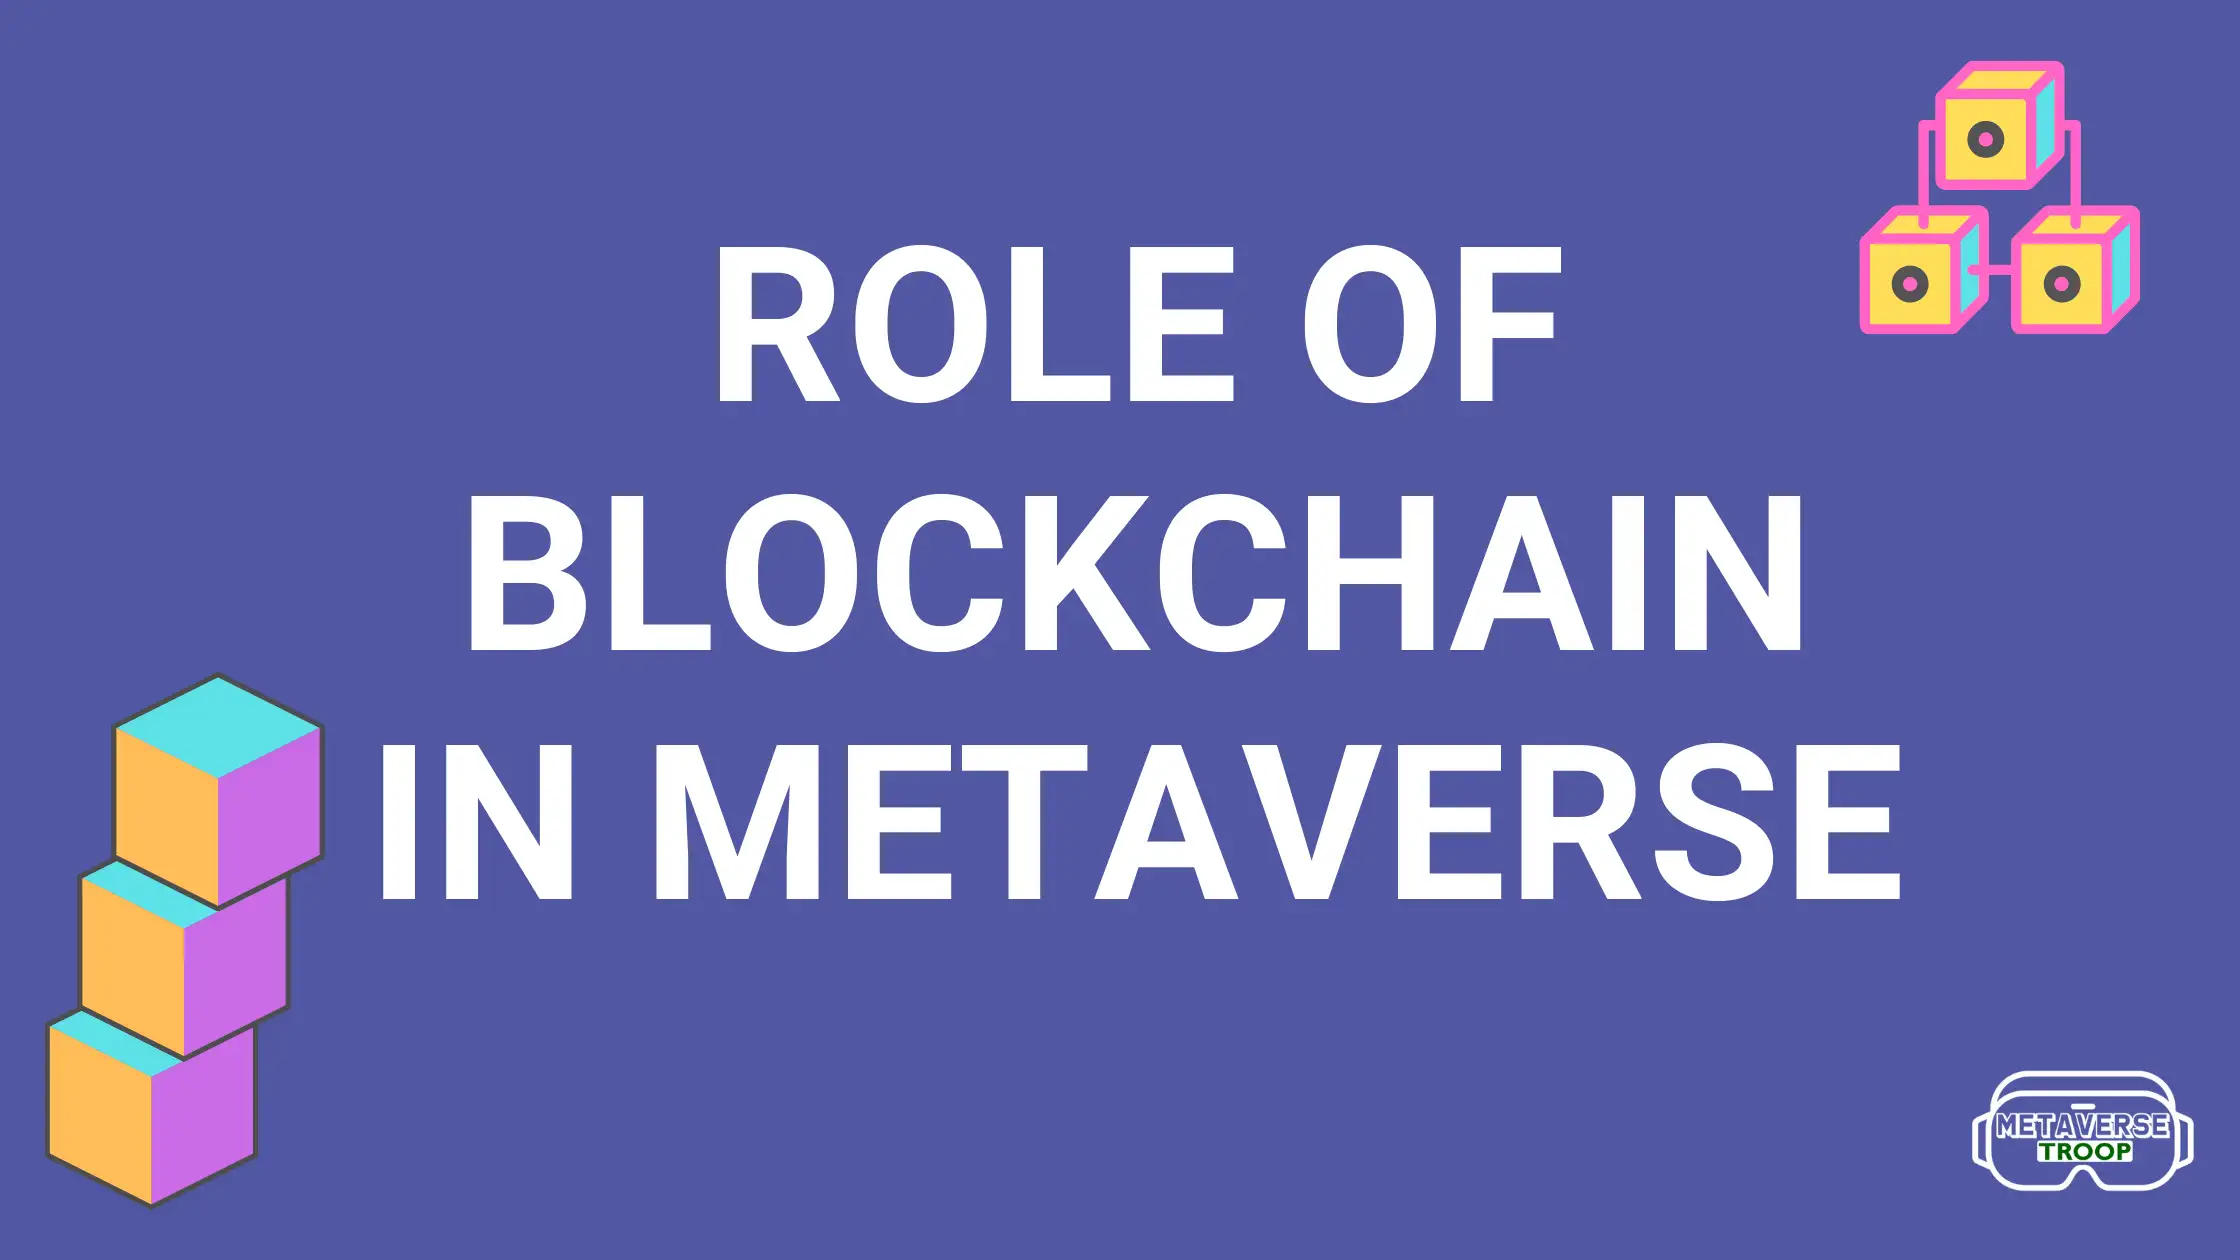 Role of Blockchain in metaverse